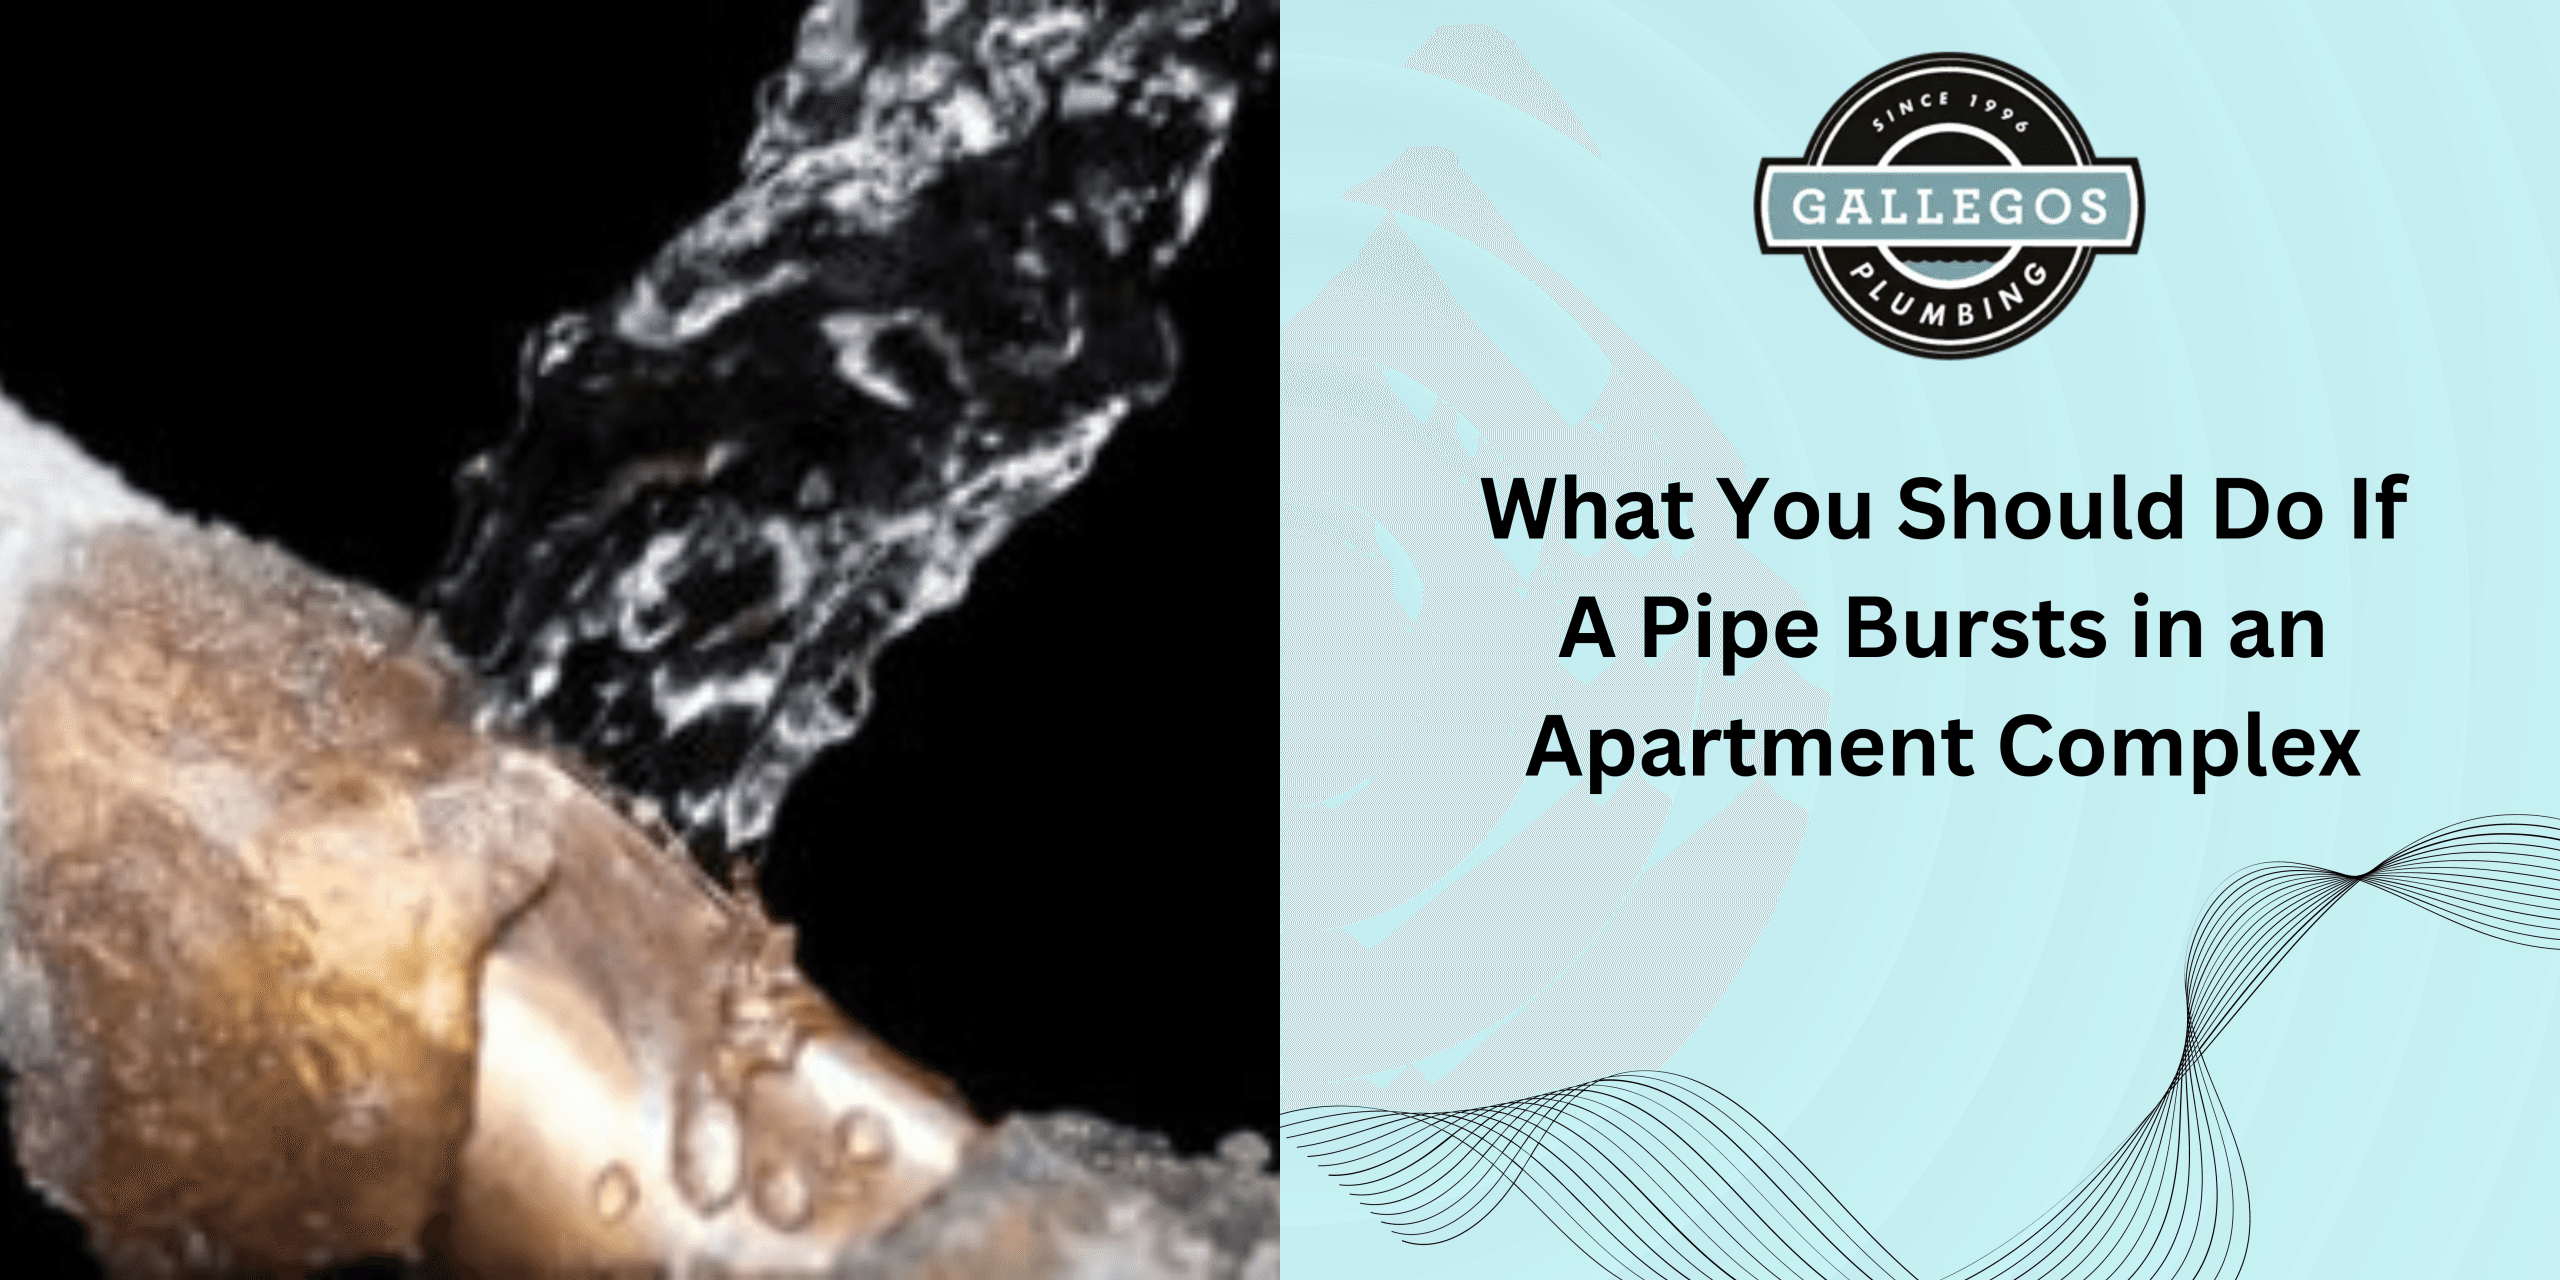 What You Should Do If a Pipe Bursts in an Apartment Complex